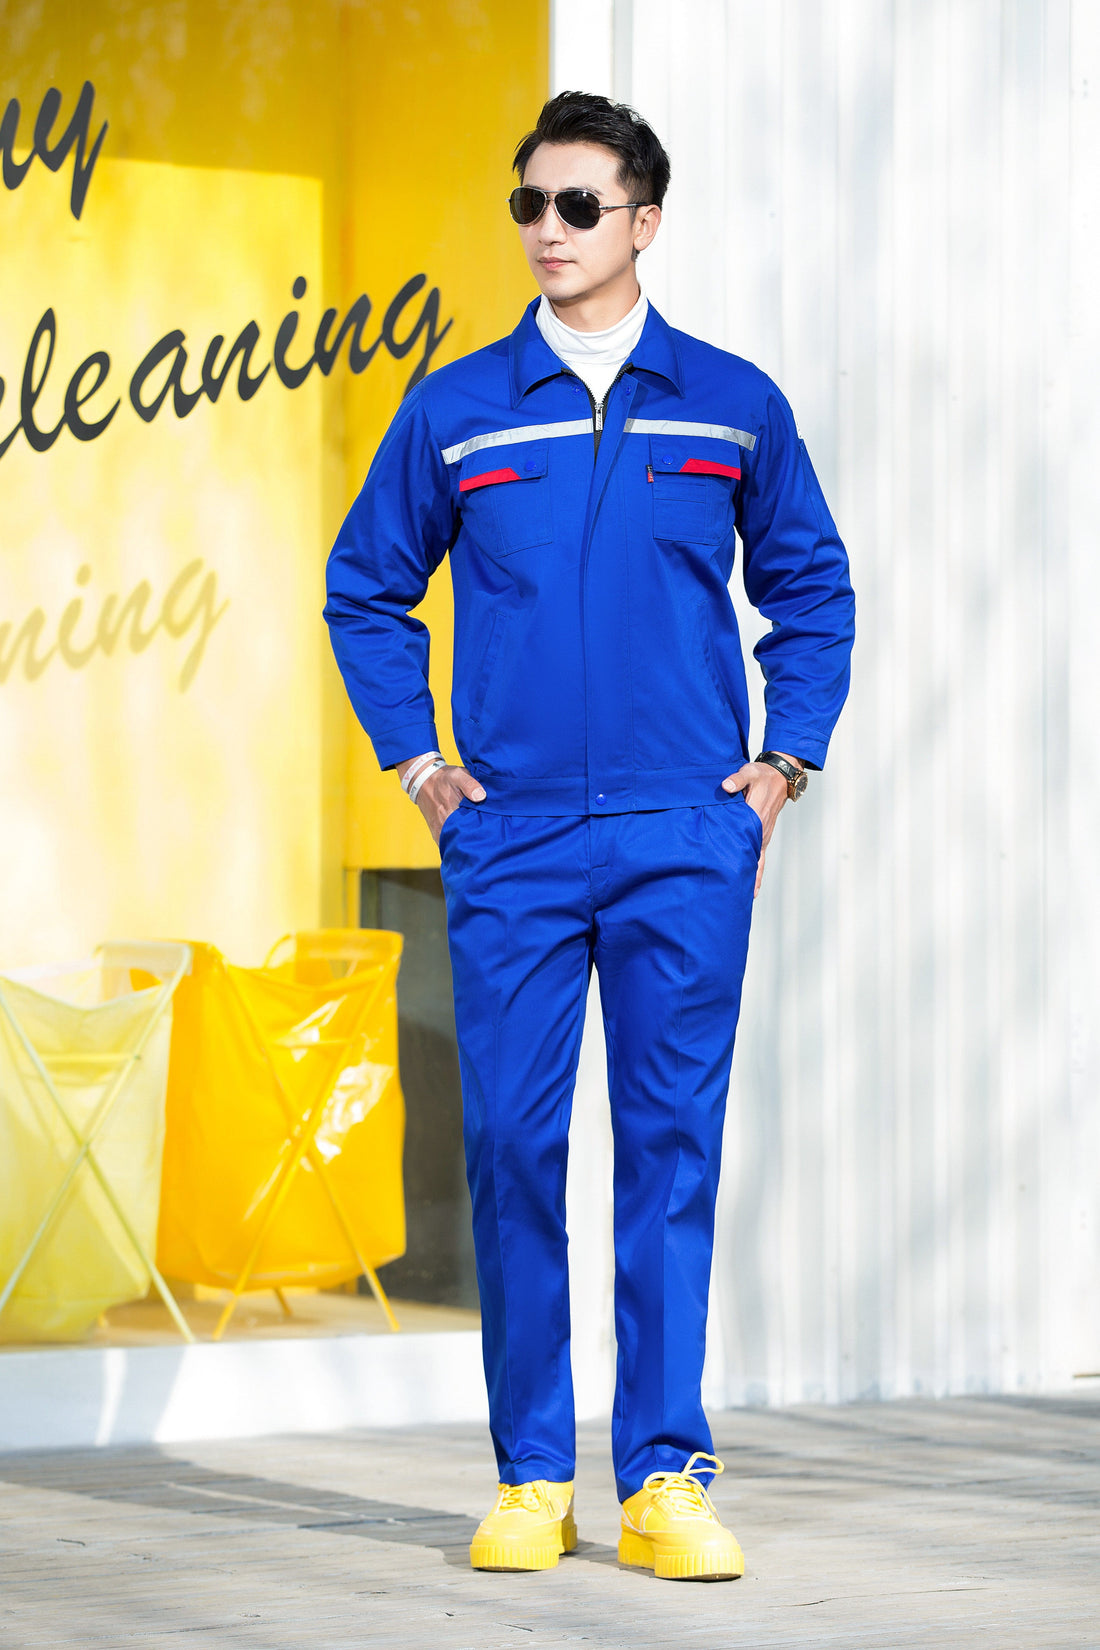 Corals Trading Co. 可樂思百貨商行 纯棉 Spring and Autumn style long-sleeved anti-static work clothes series SD-AS-W202